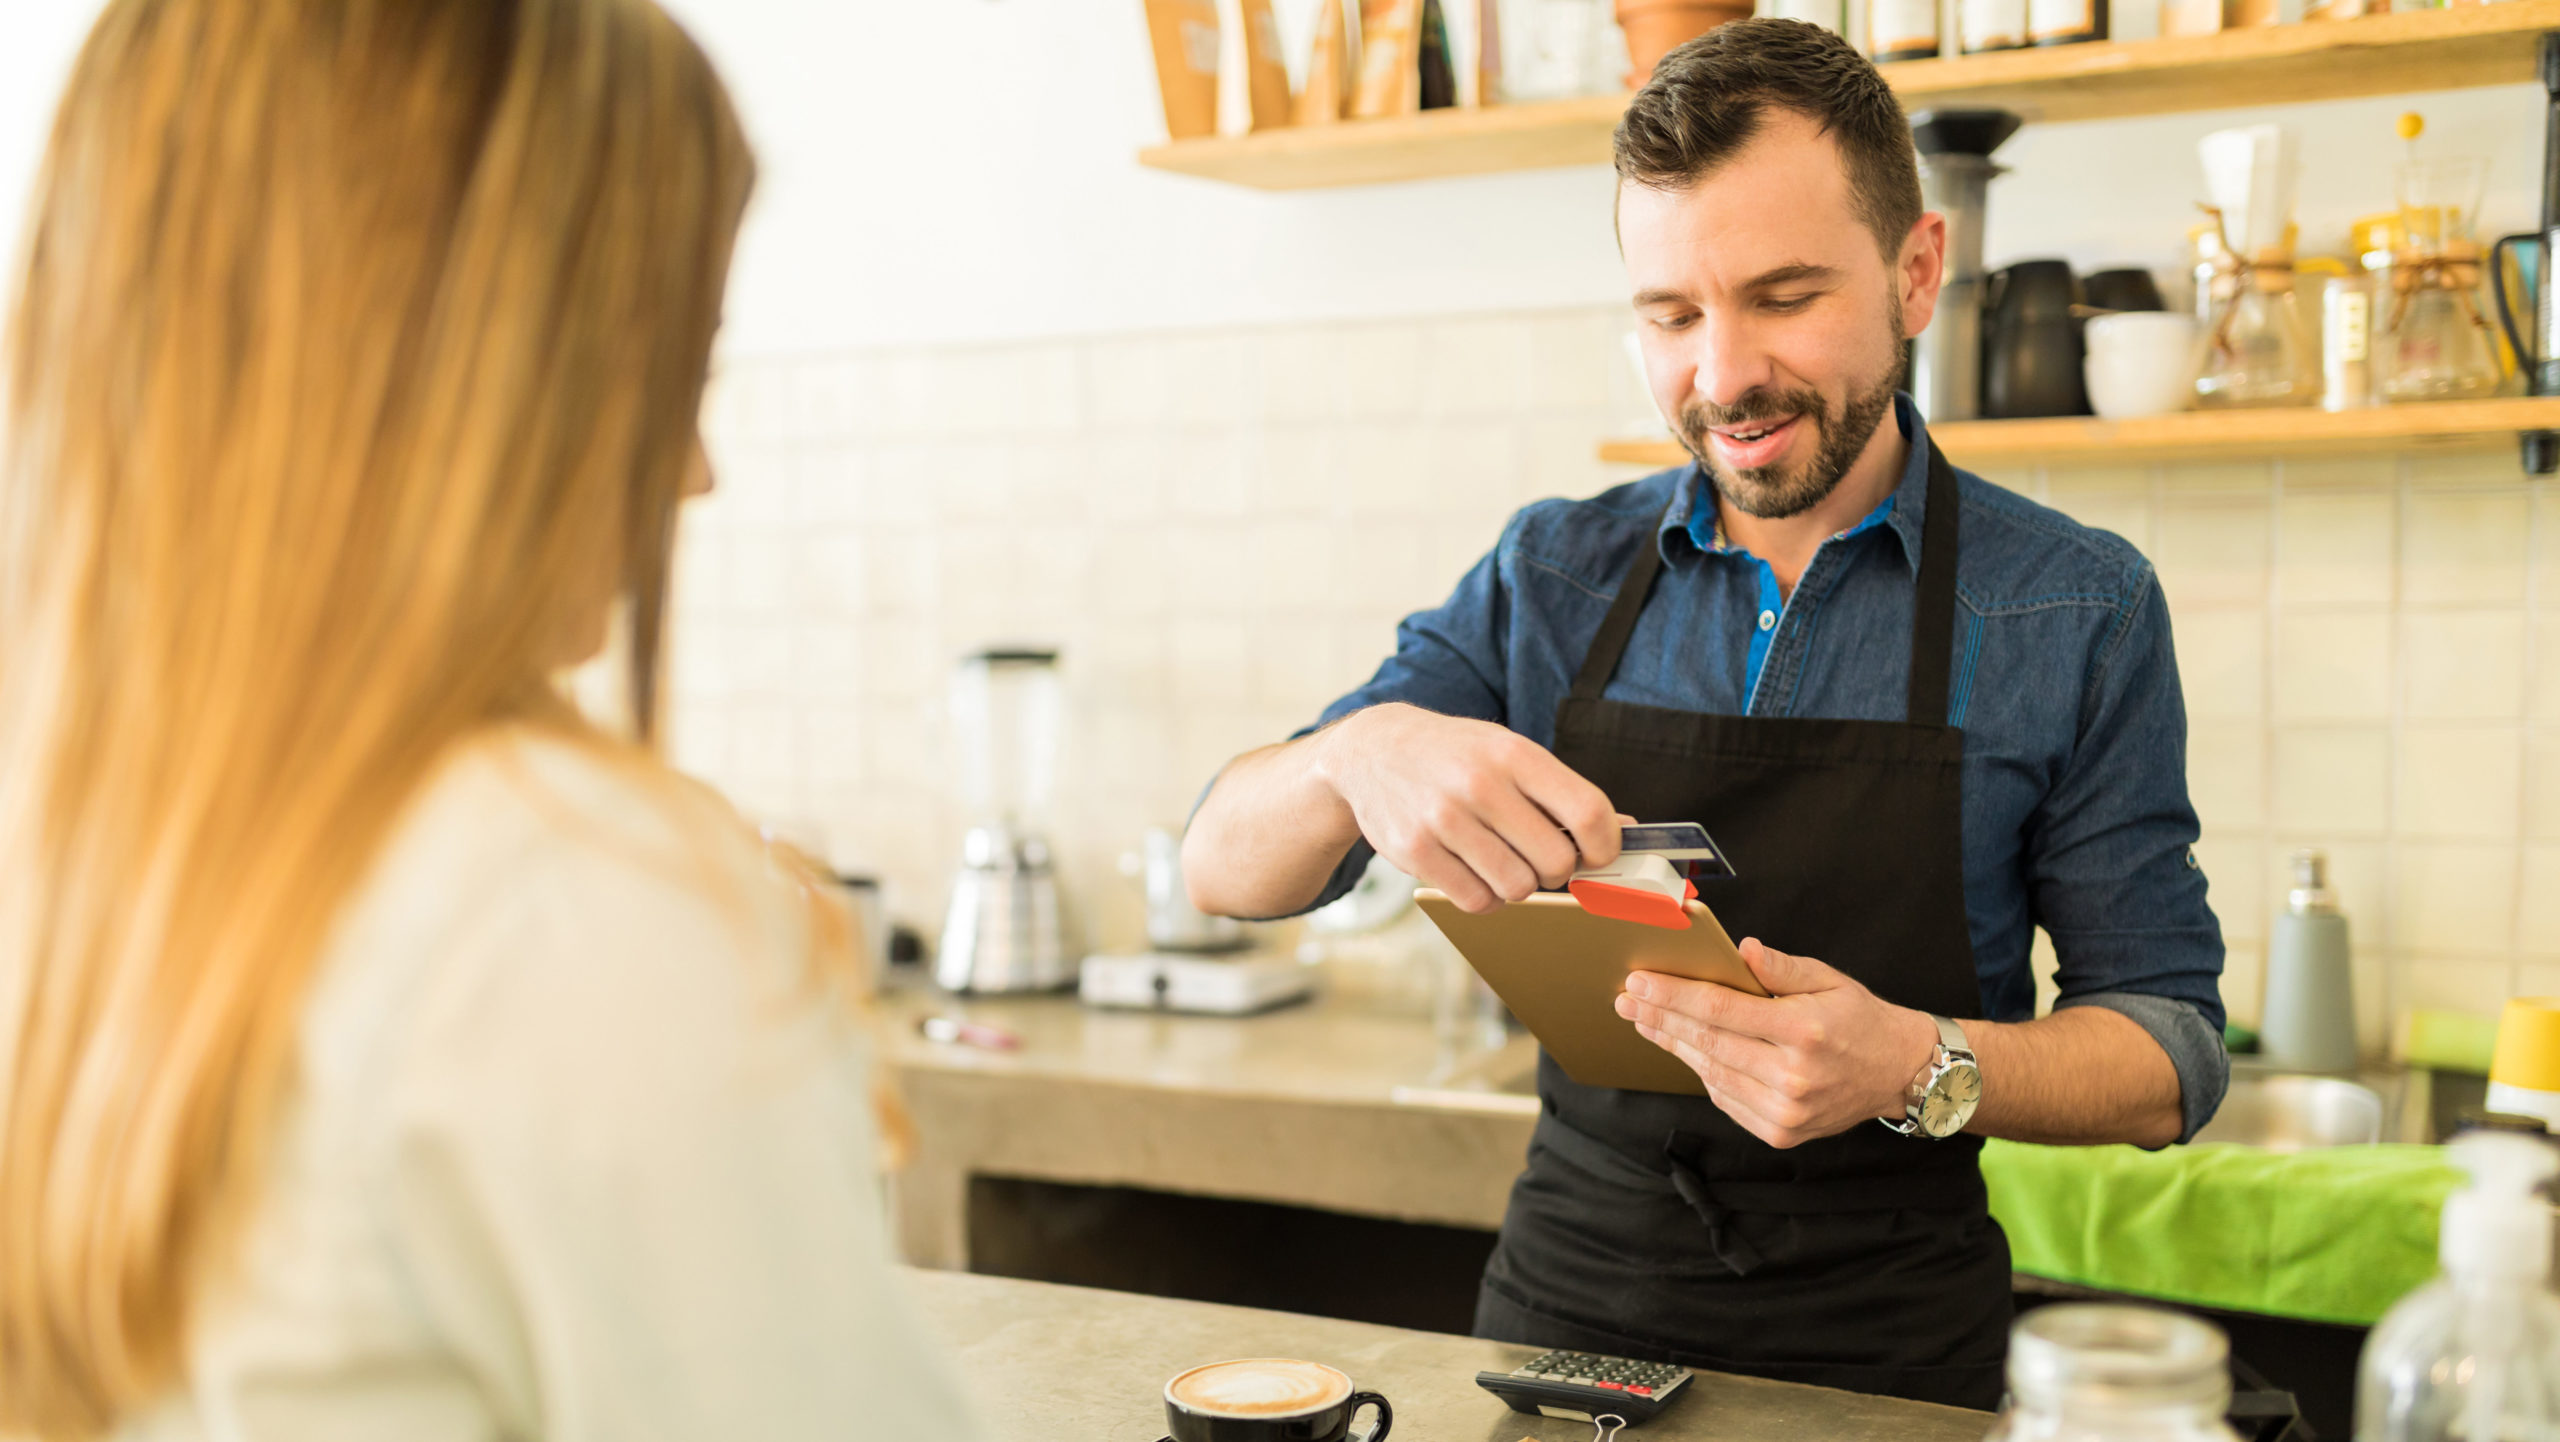 Customer paying for coffee at a cafe while barista swipes her credit card